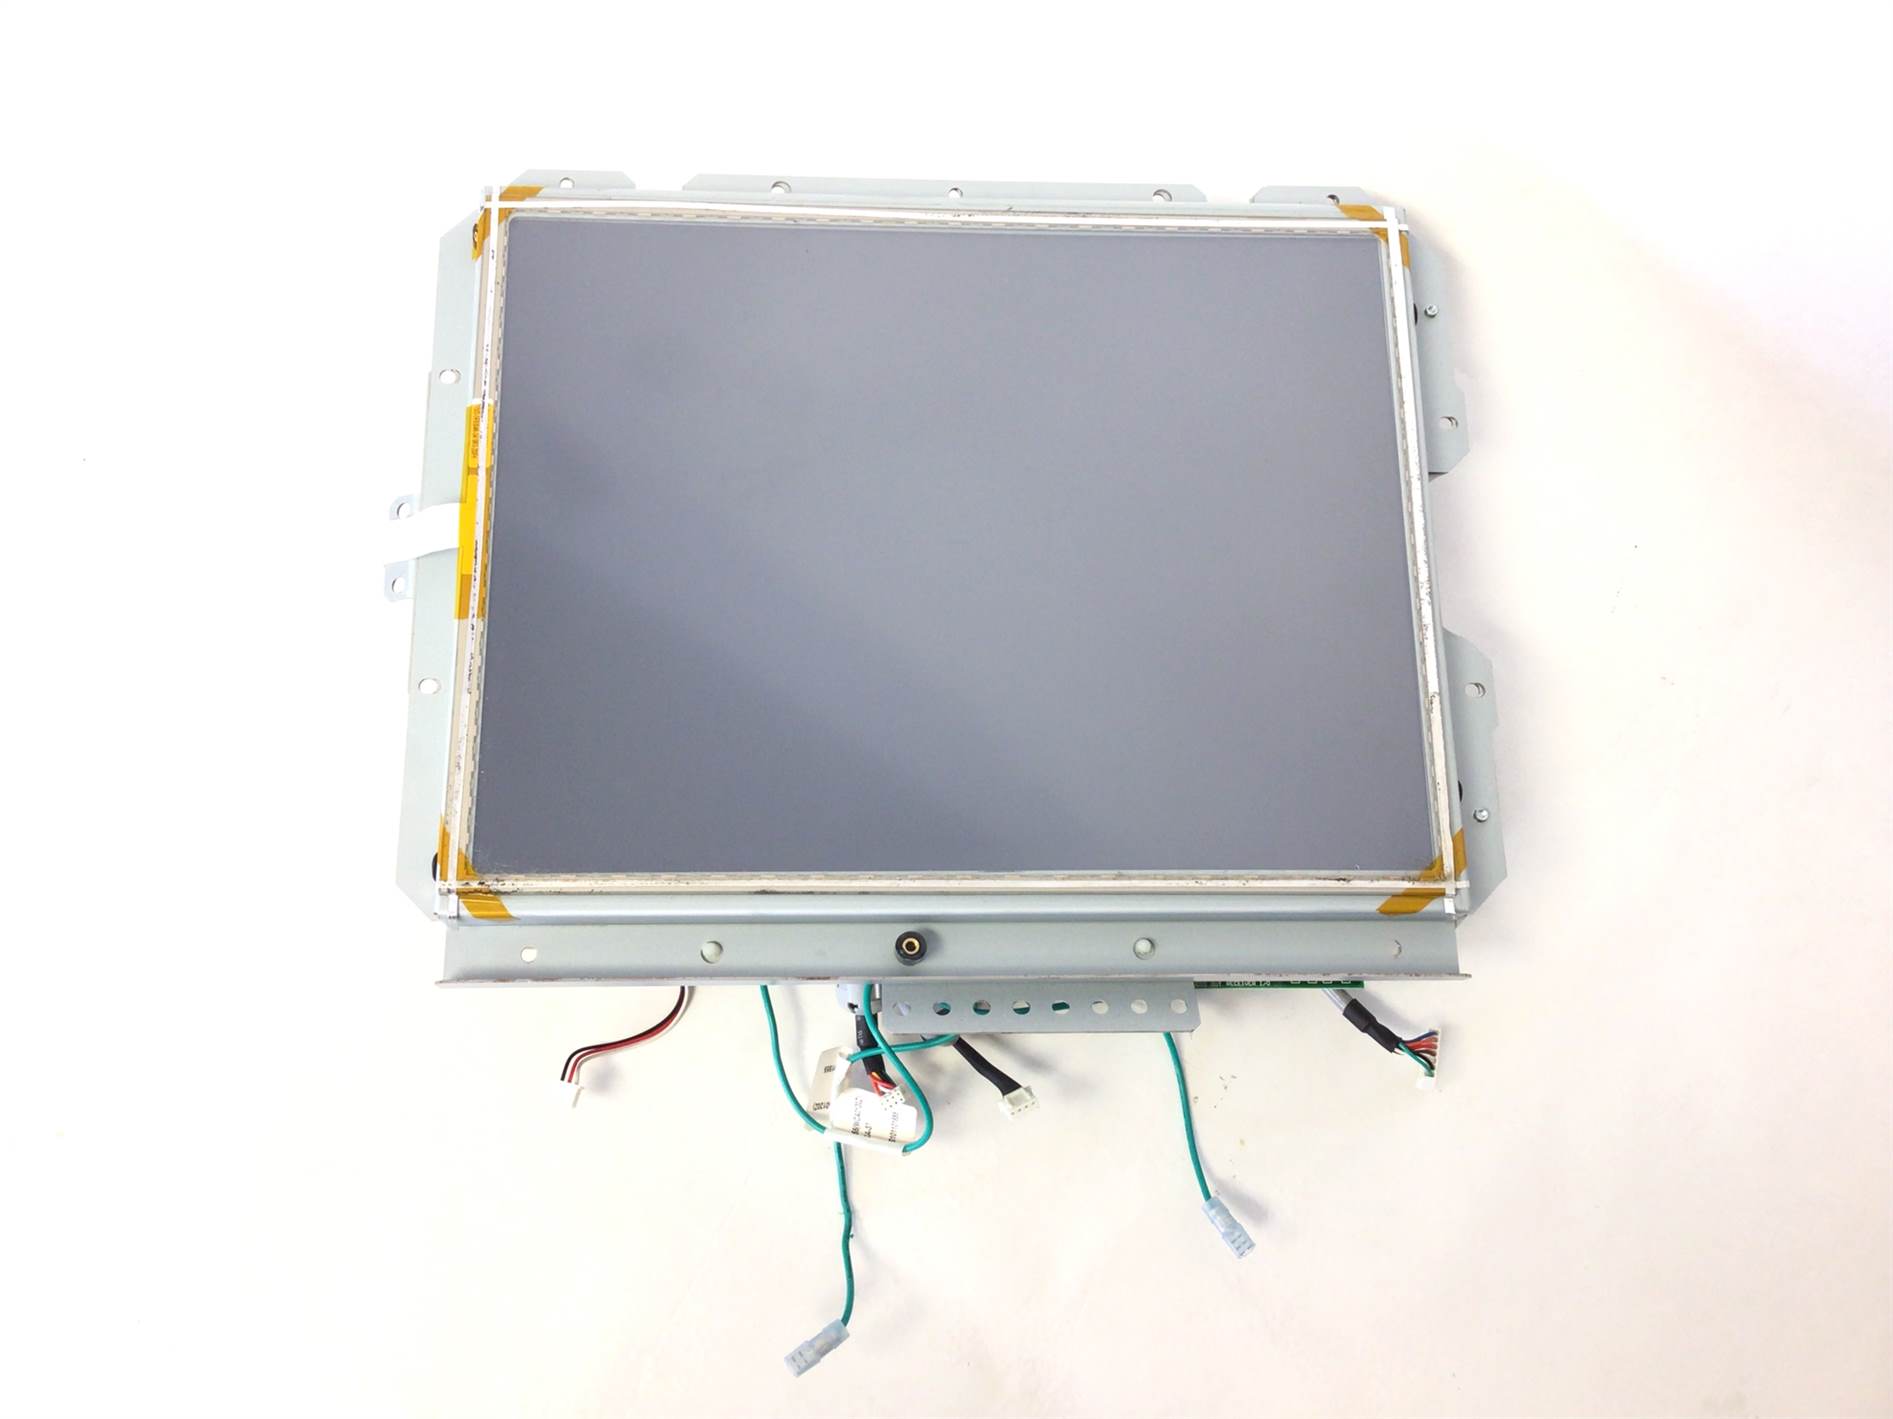 TouchScreen Display Console LCD Assembly With CPU Circuit Board (Used)